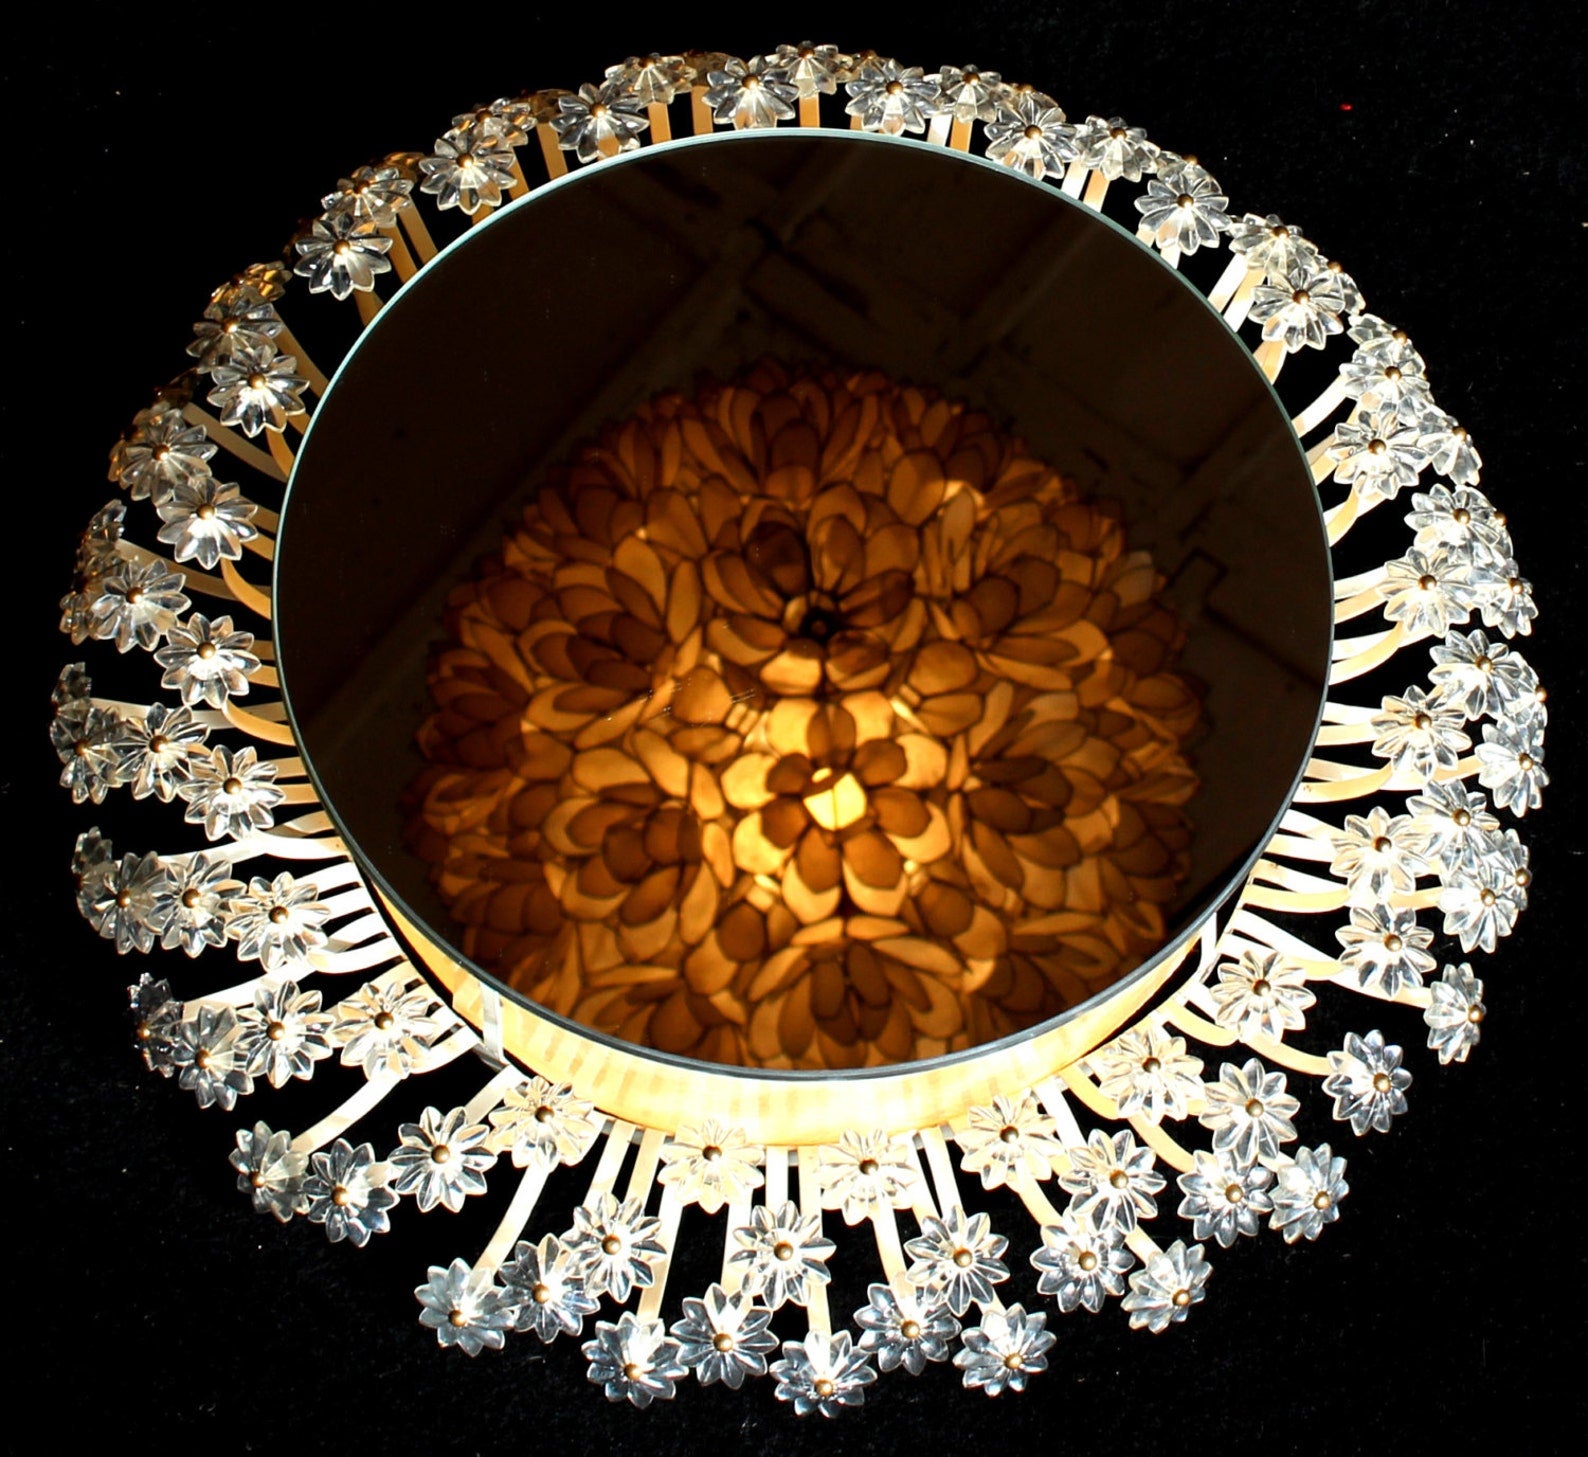 Emil Stejnar small illuminated flower mirror 1960s

Small illuminated mirror - 1 light (e27) white colored frame & perspex flowers 60s

Our small Austrian collection shows pieces of the manufacturer Rupert Nikoll in Vienna. The lighting designs